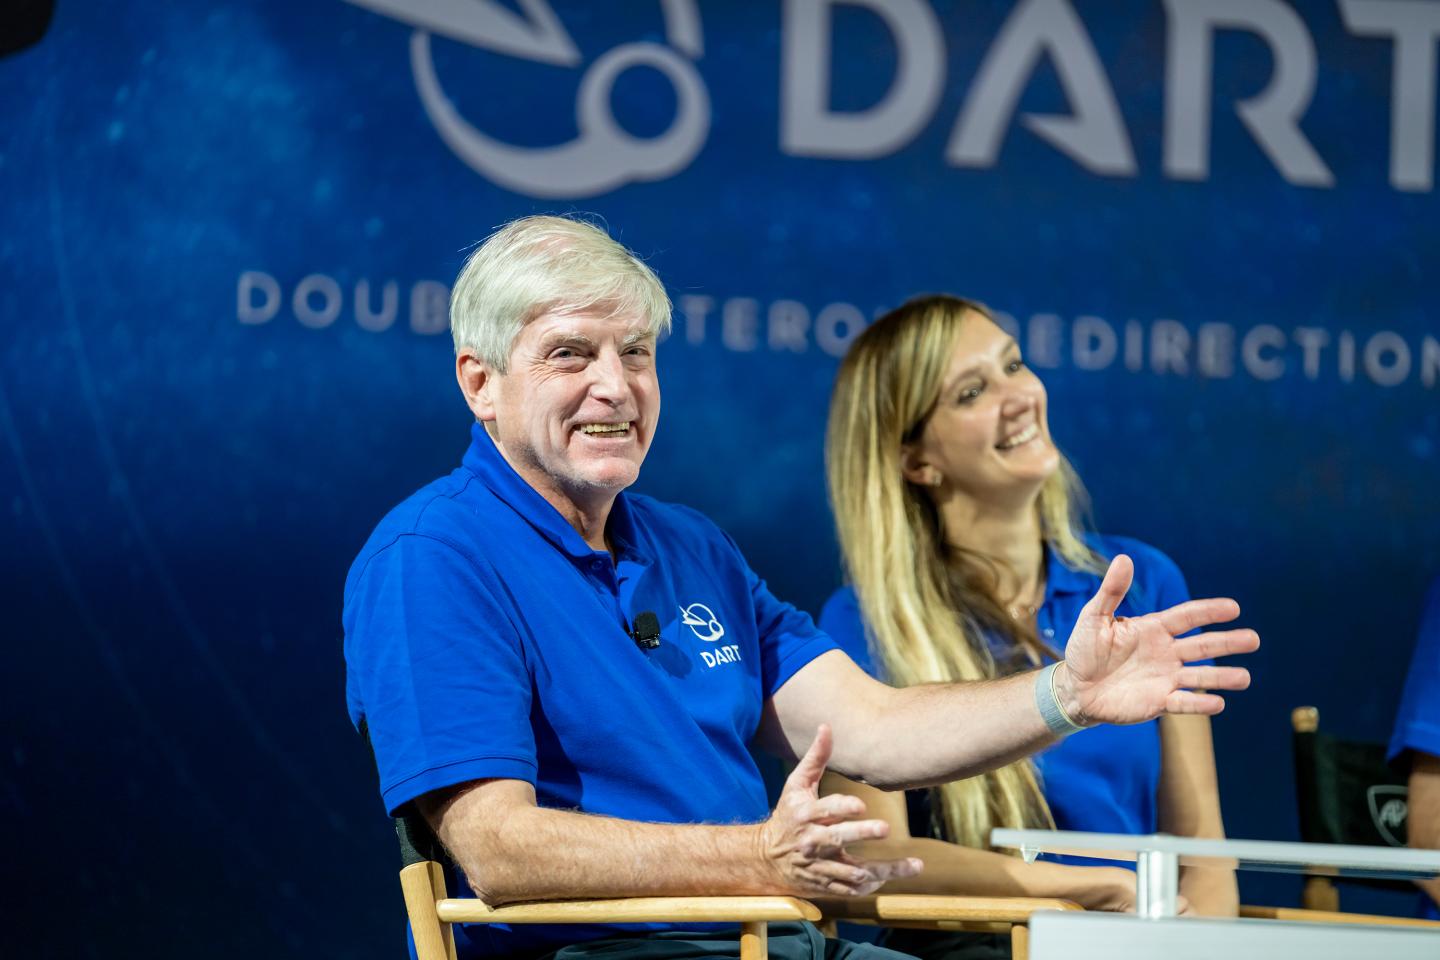 A man in a blue shirt is seen sitting in front of a large blue backdrop that reads DART